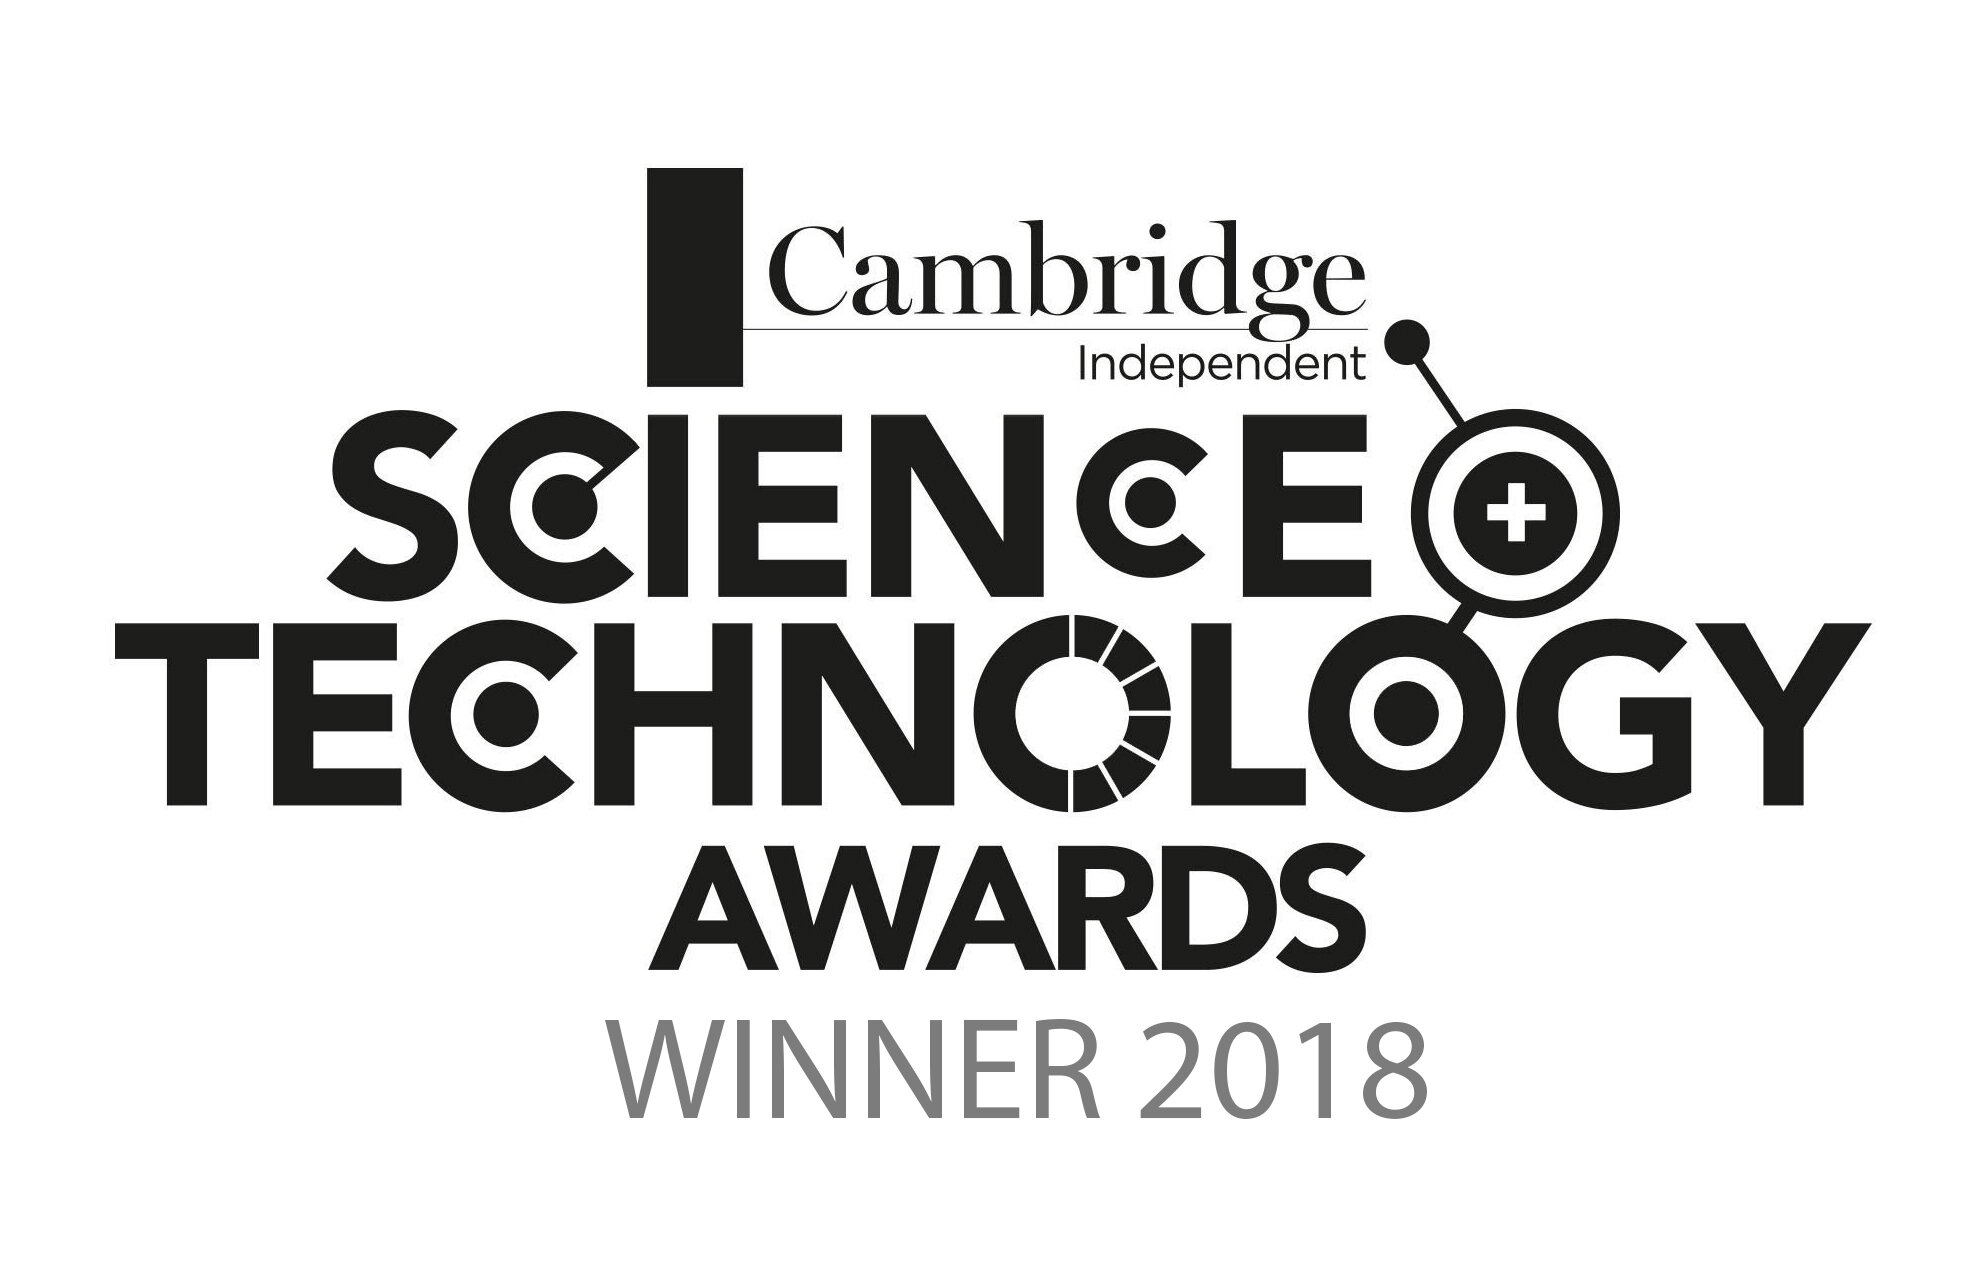 Cambridge Independent Science and Technology Awards winner 2018 logo.jpg